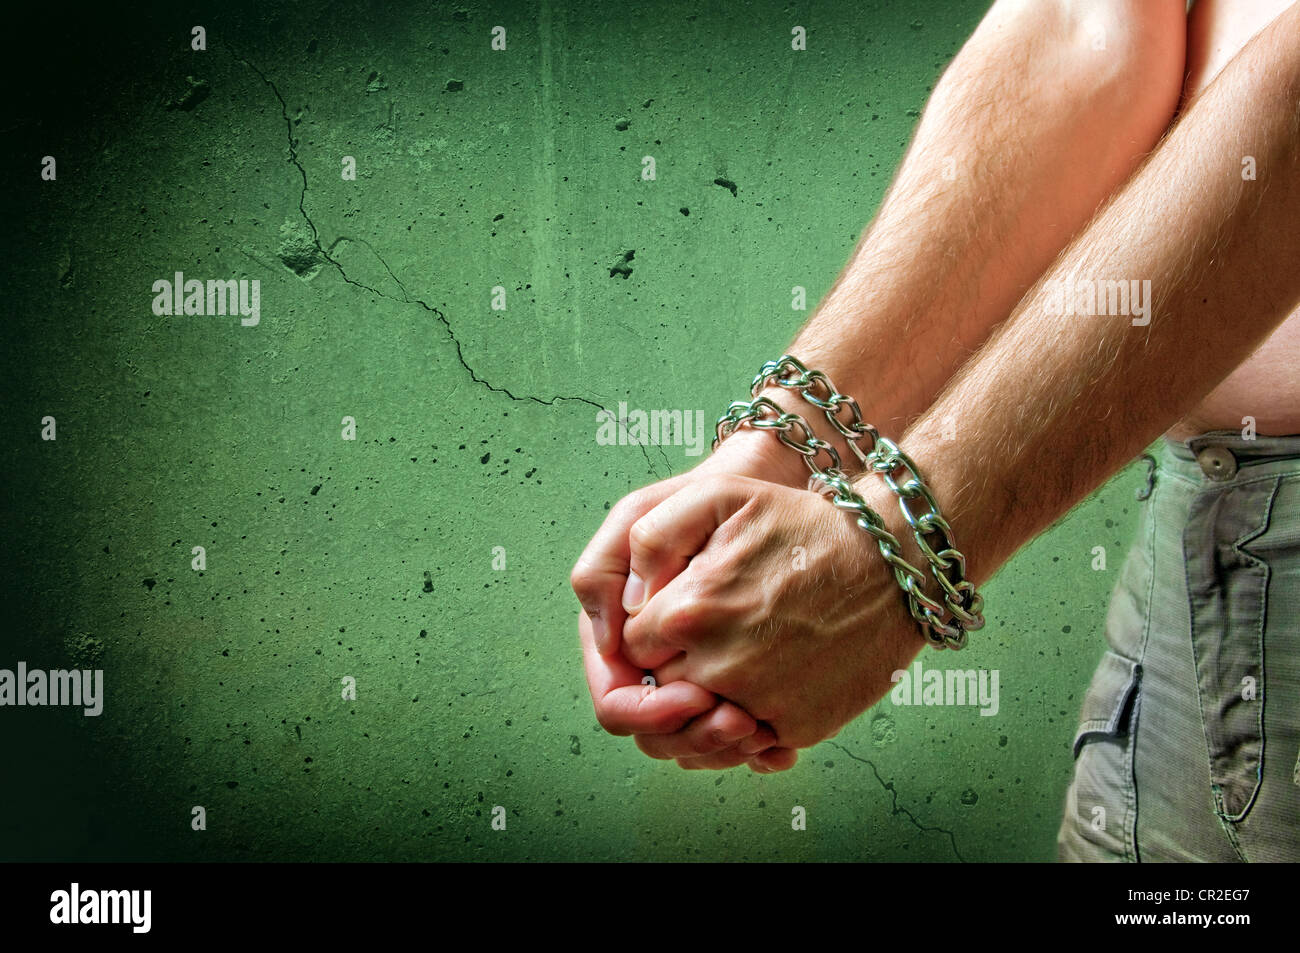 Male hands with chain wrapped around them, prisoner concept Stock Photo